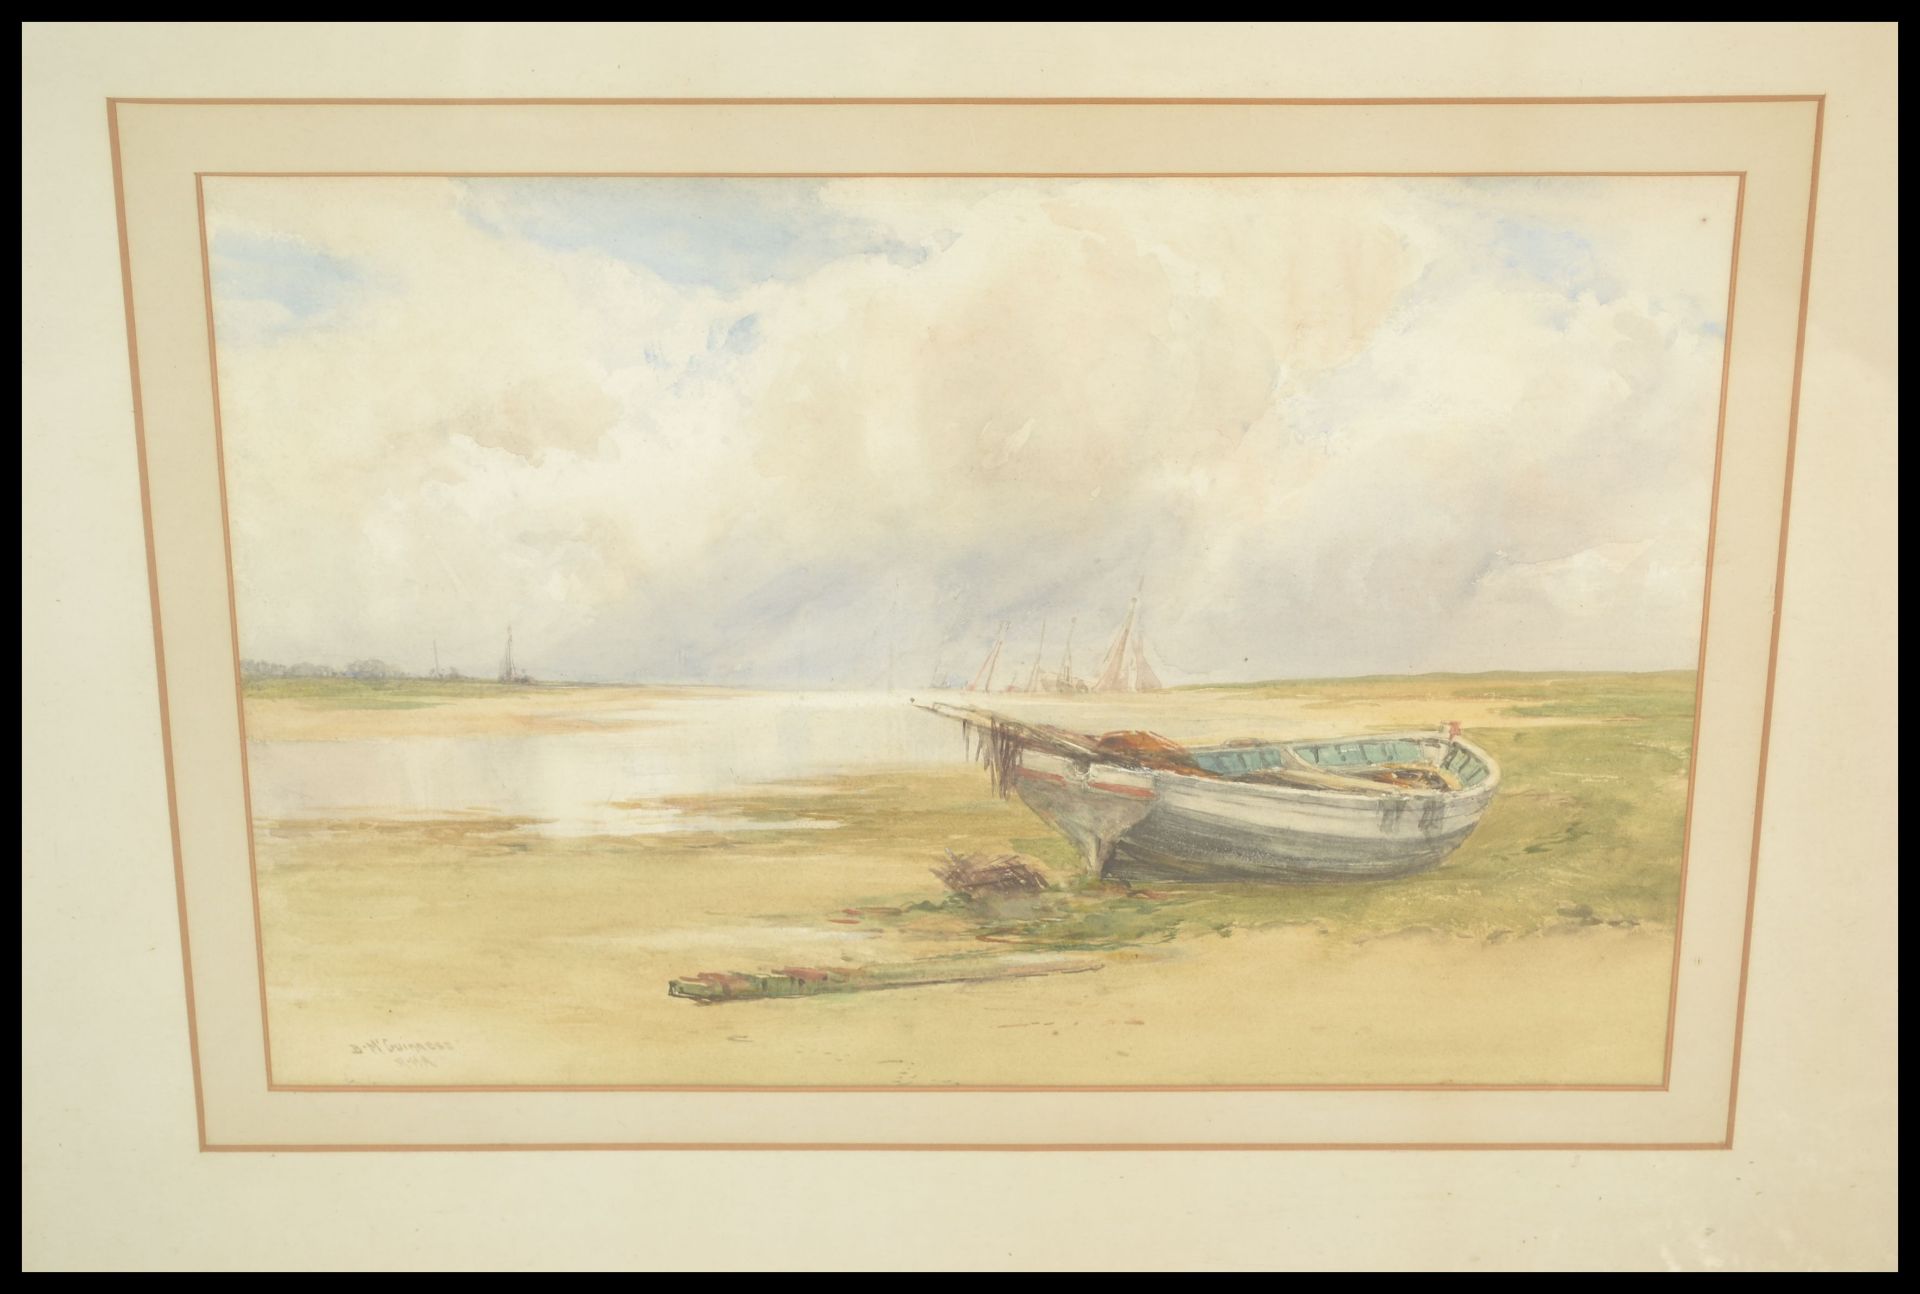 William Bingham Mcguinness RHA (1849-1928) - An early 20th Century watercolour on paper depicting